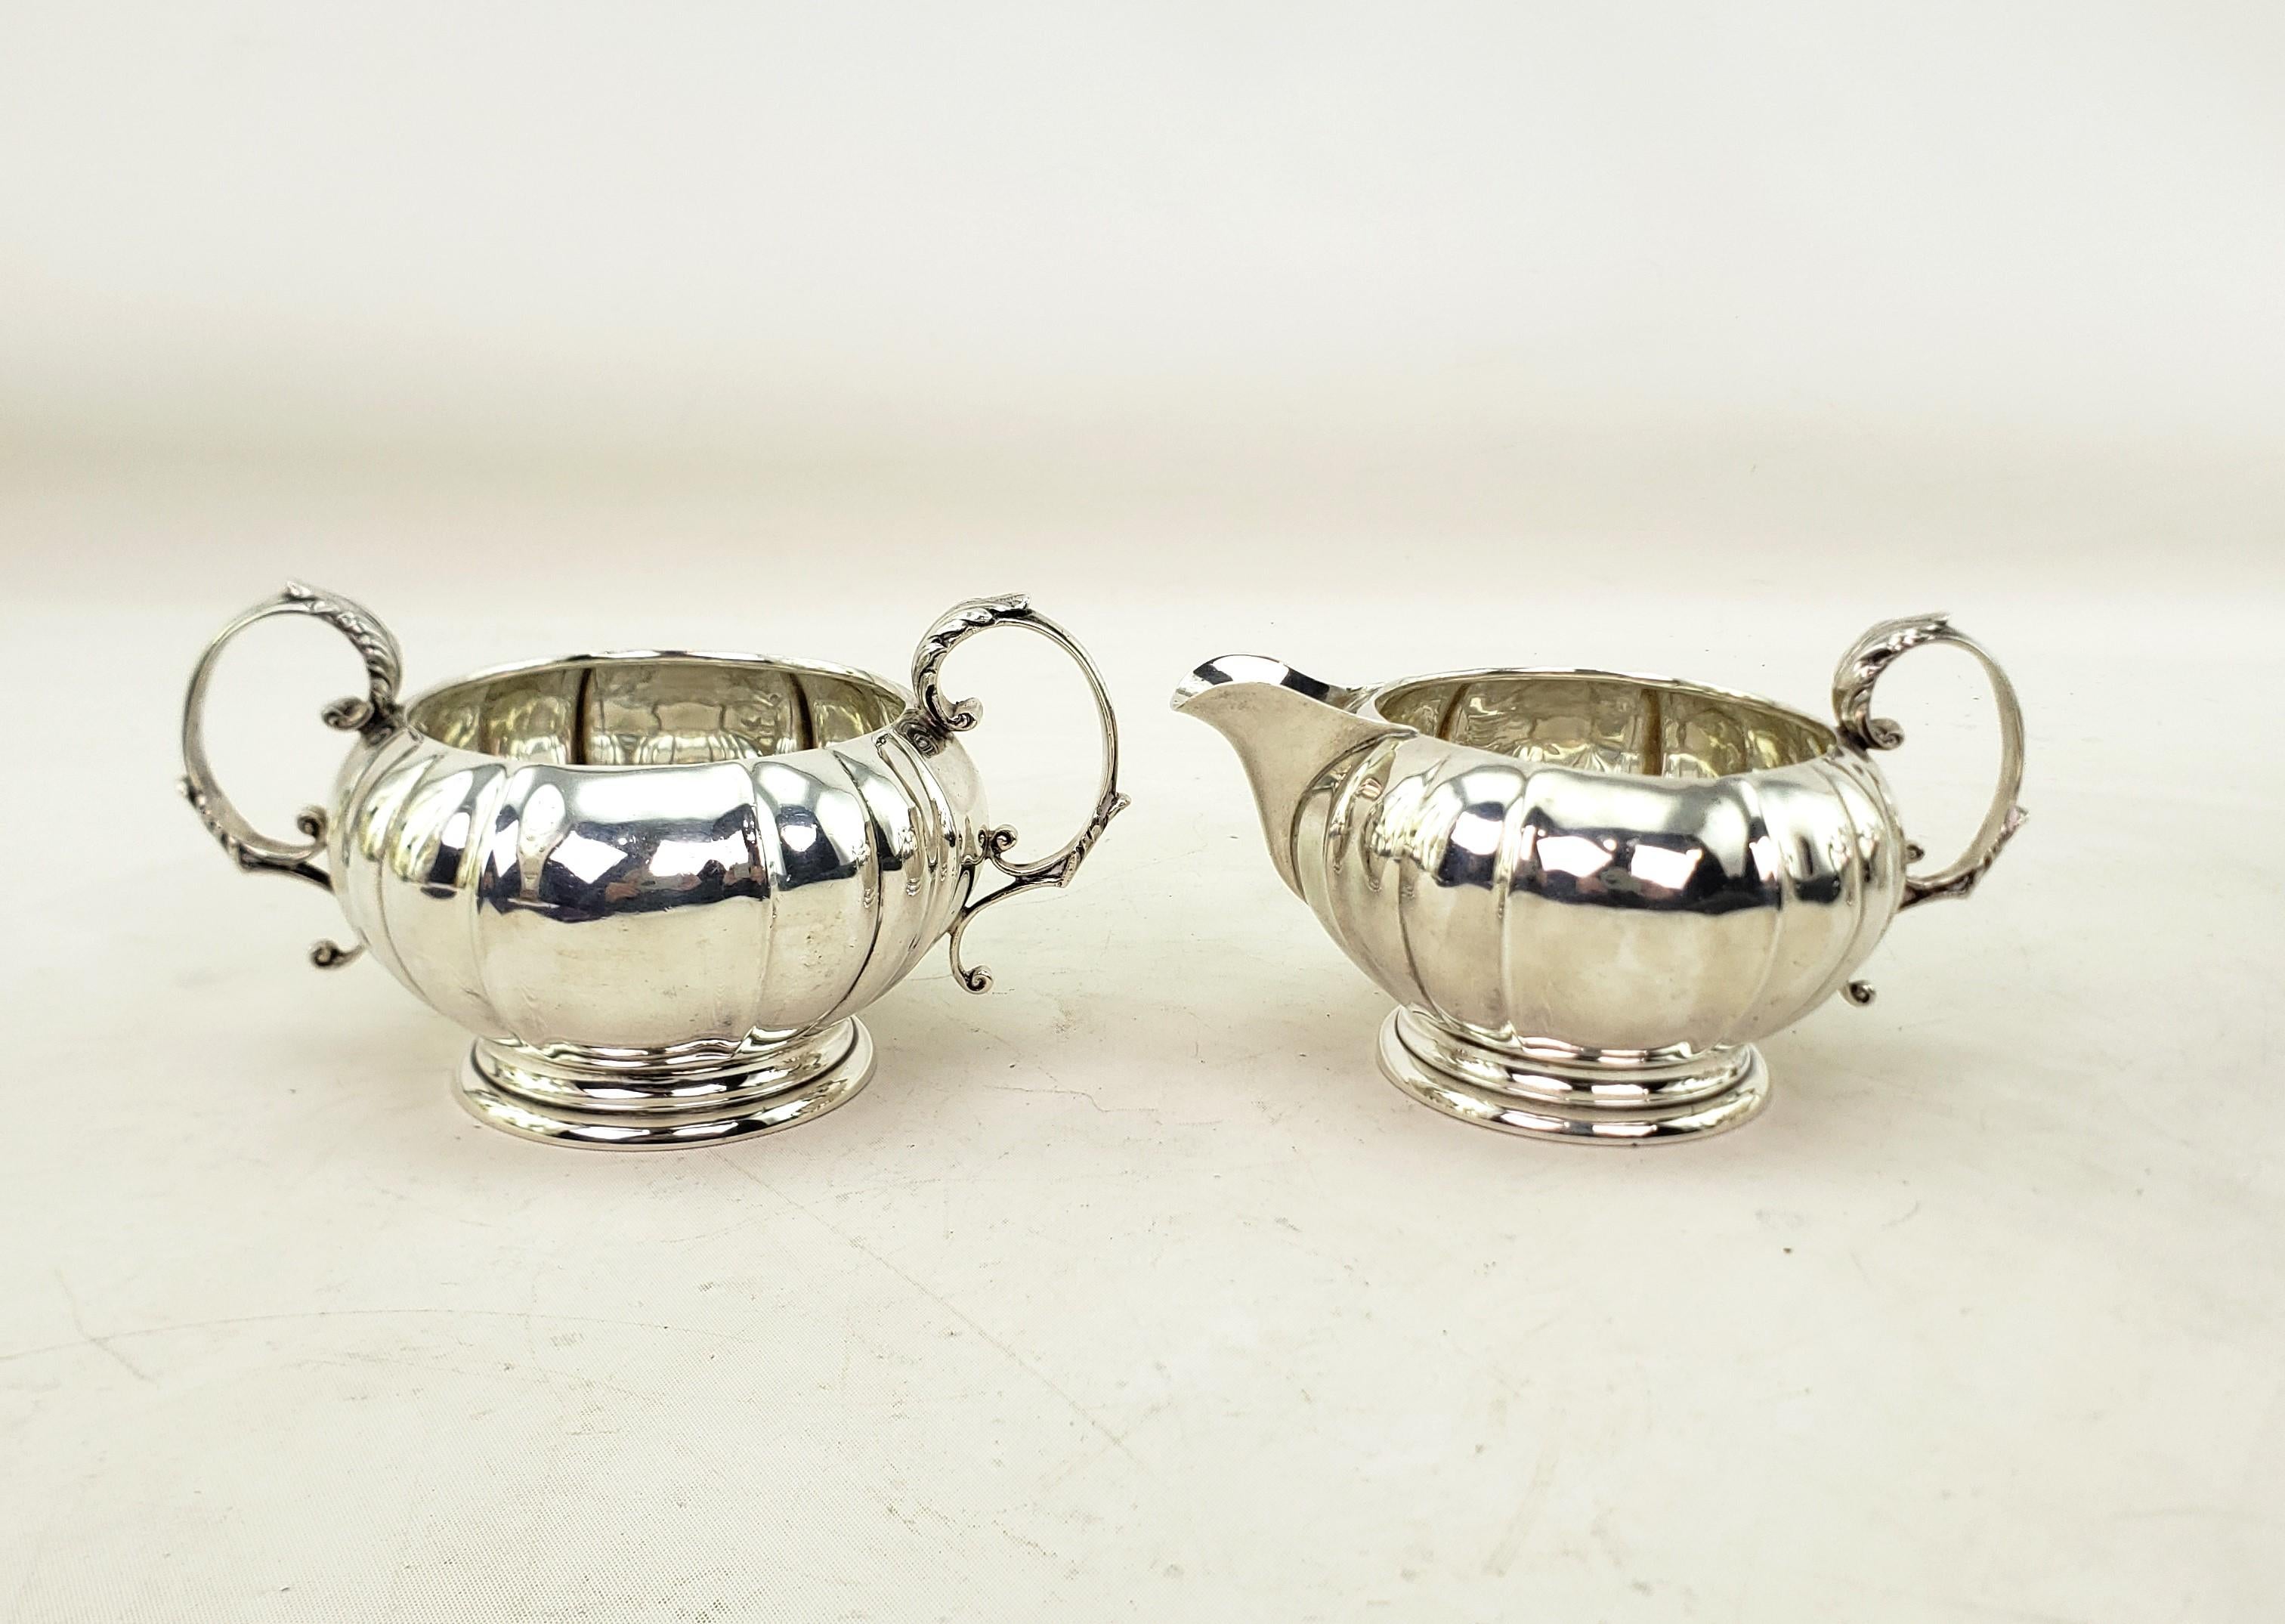 Antique Birks Sterling Silver Tea or Coffee Set with Creamer & Sugar Bowl For Sale 8